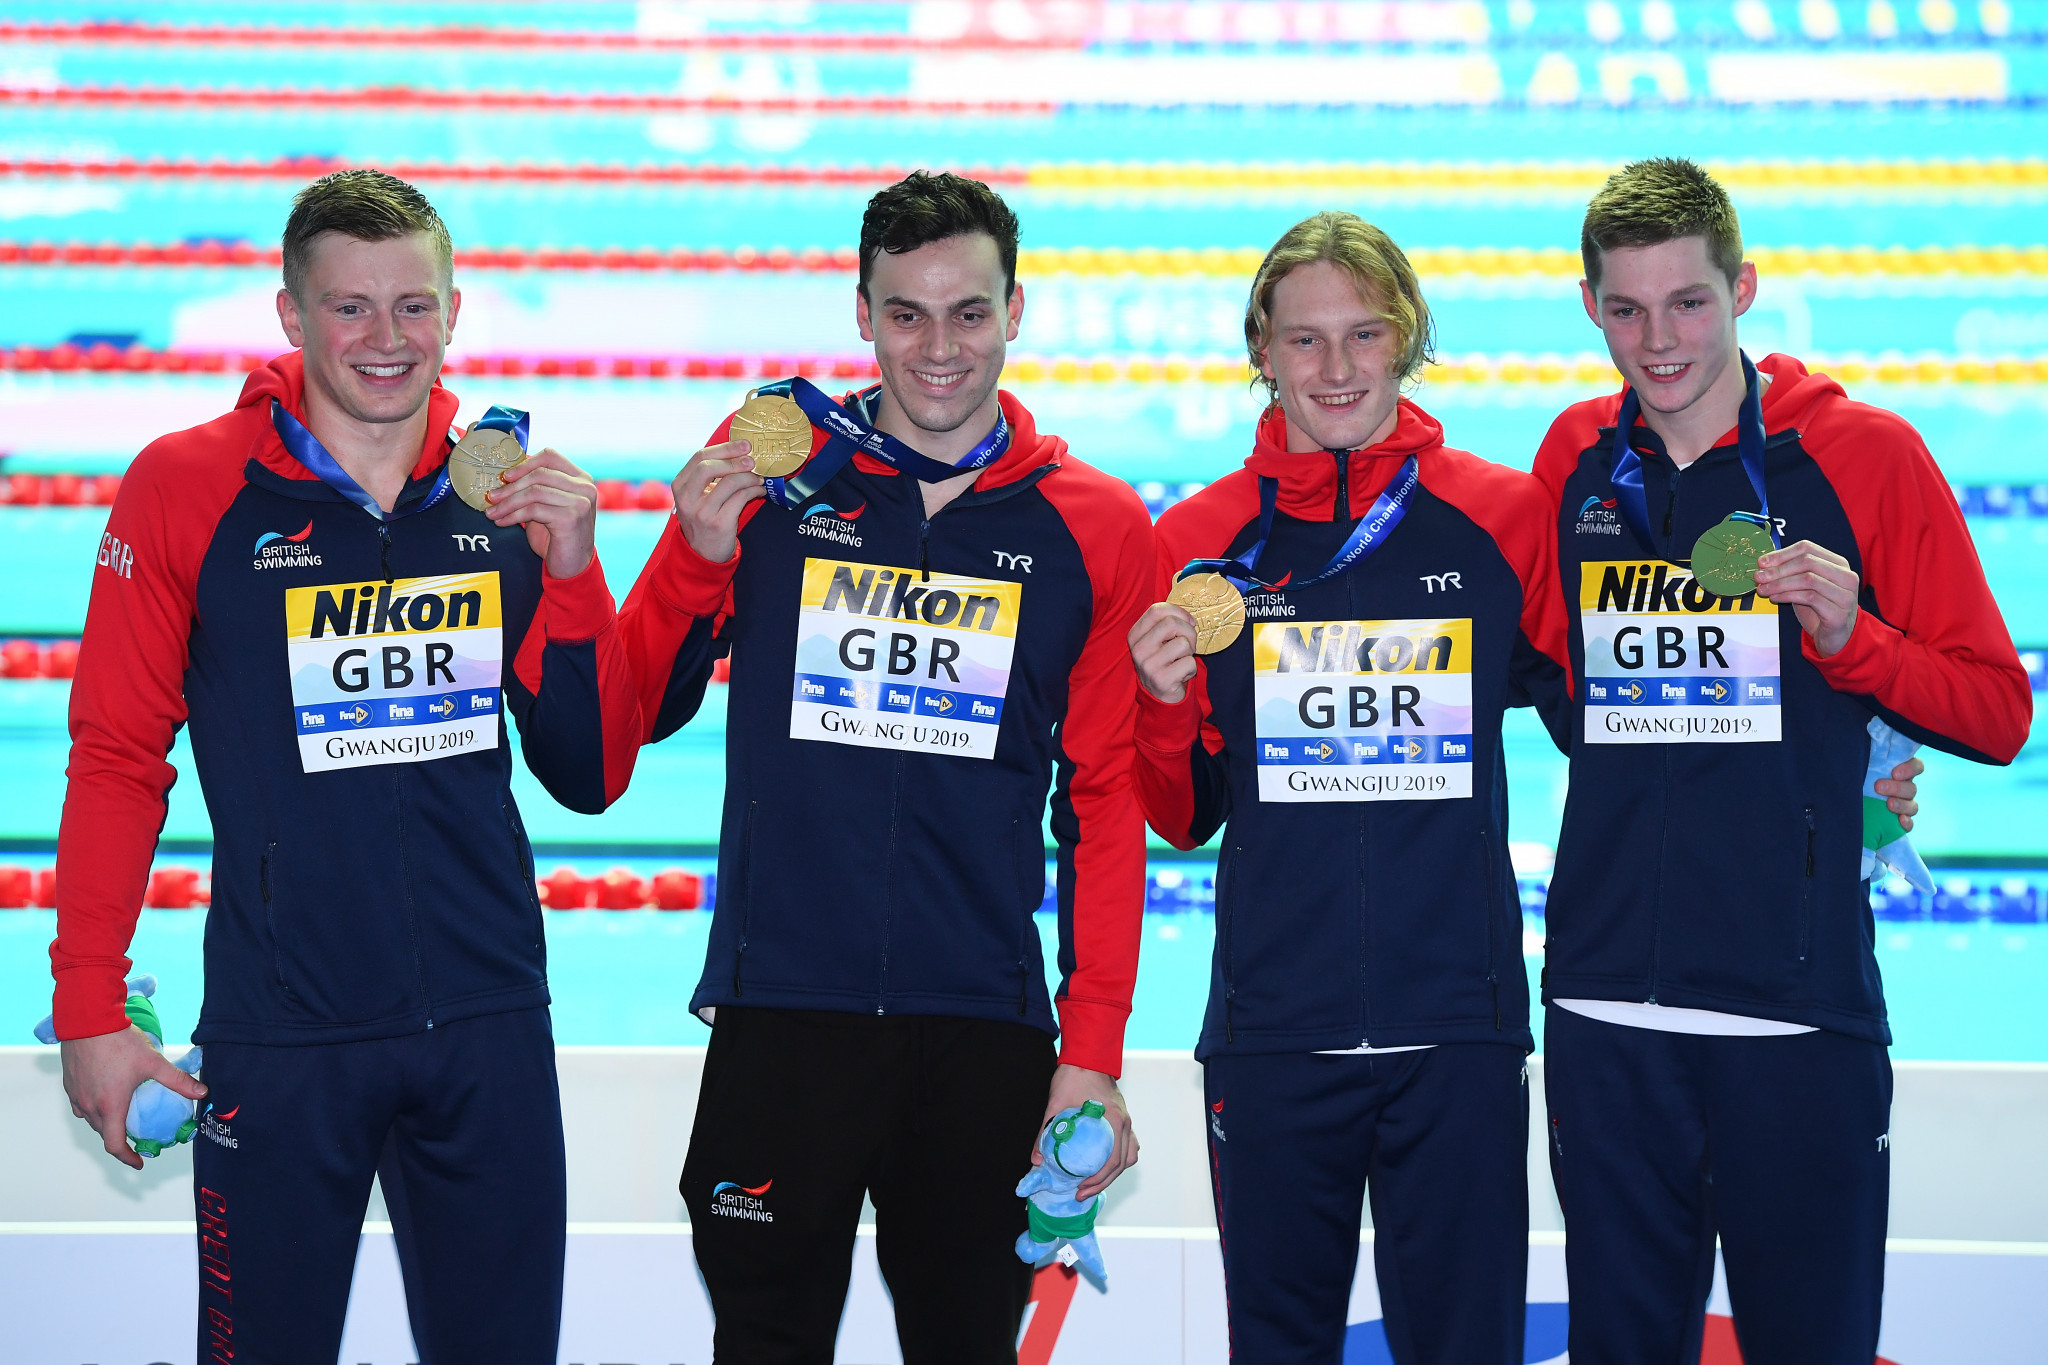 Adam Peaty, James Guy, Luke Greenbank and Duncan Scott won gold in the men's 4x100m medley relay at the 2019 World Championships ©Getty Images